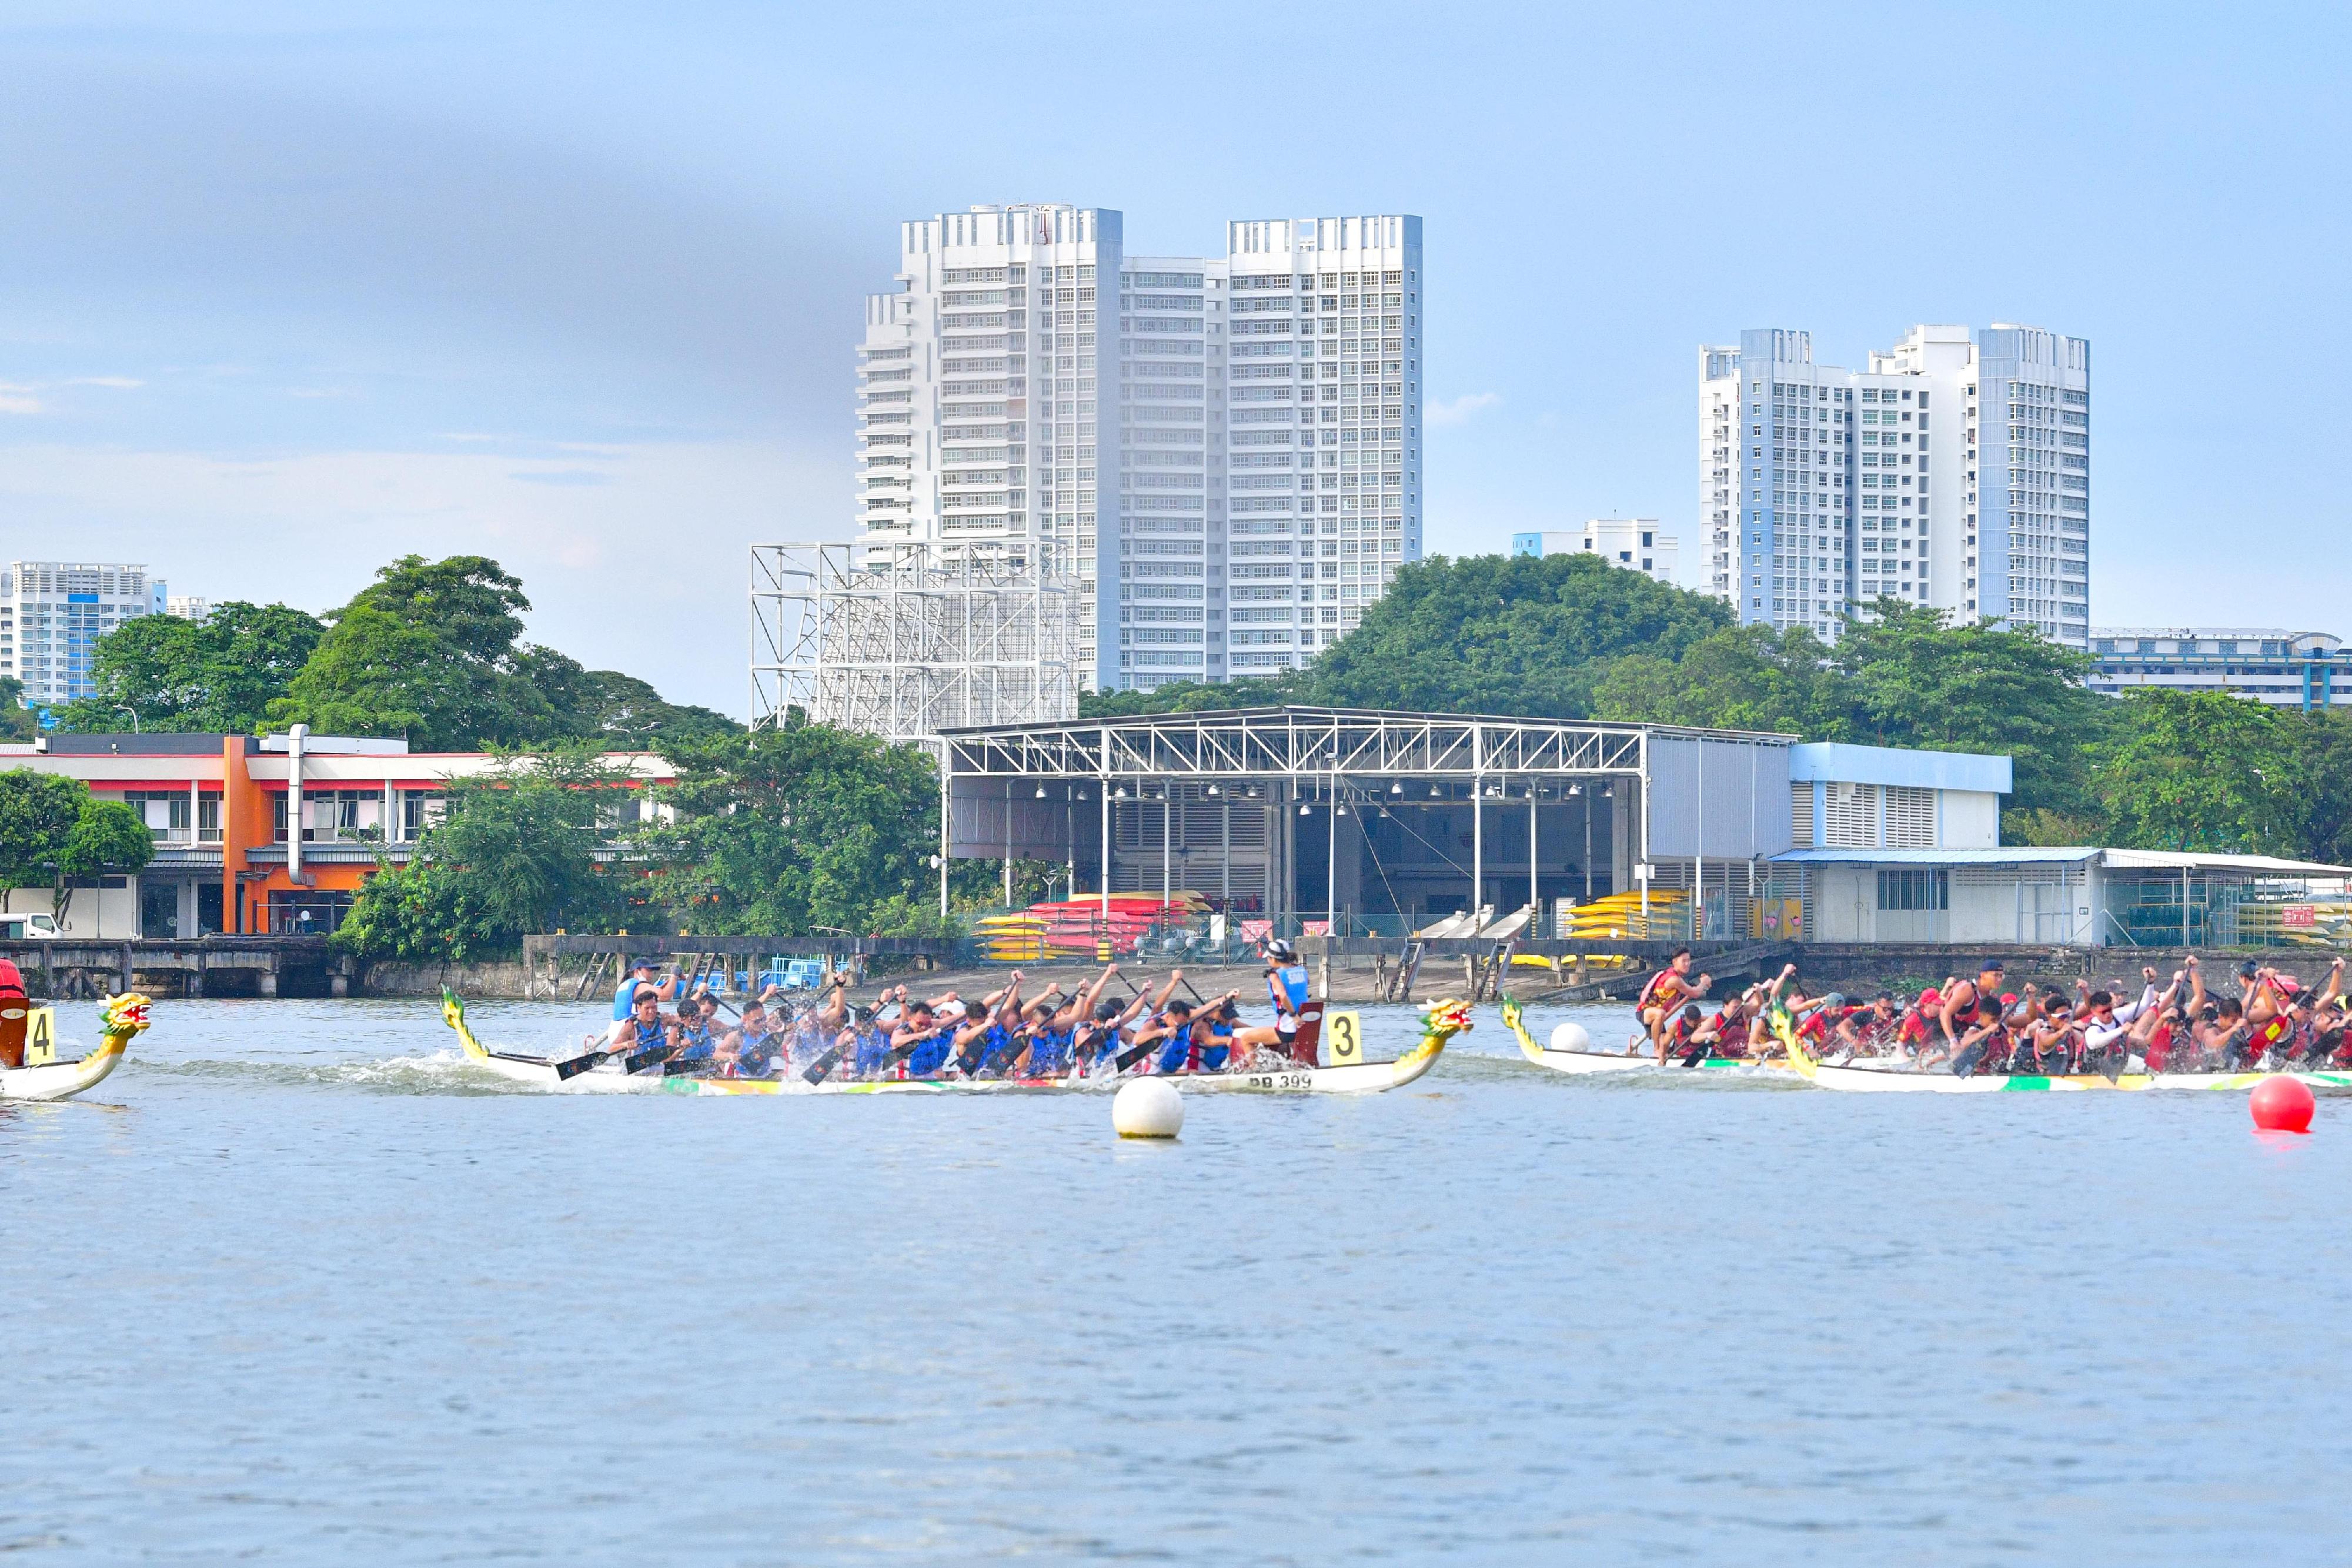 The Hong Kong Economic and Trade Office in Singapore hosted the Hong Kong Cup 2022 dragon boat races during the Singapore Regatta Waterfest yesterday and today (December 3 and 4) to celebrate the 25th anniversary of the establishment of the Hong Kong Special Administrative Region. Photo shows paddlers competing in the race. 